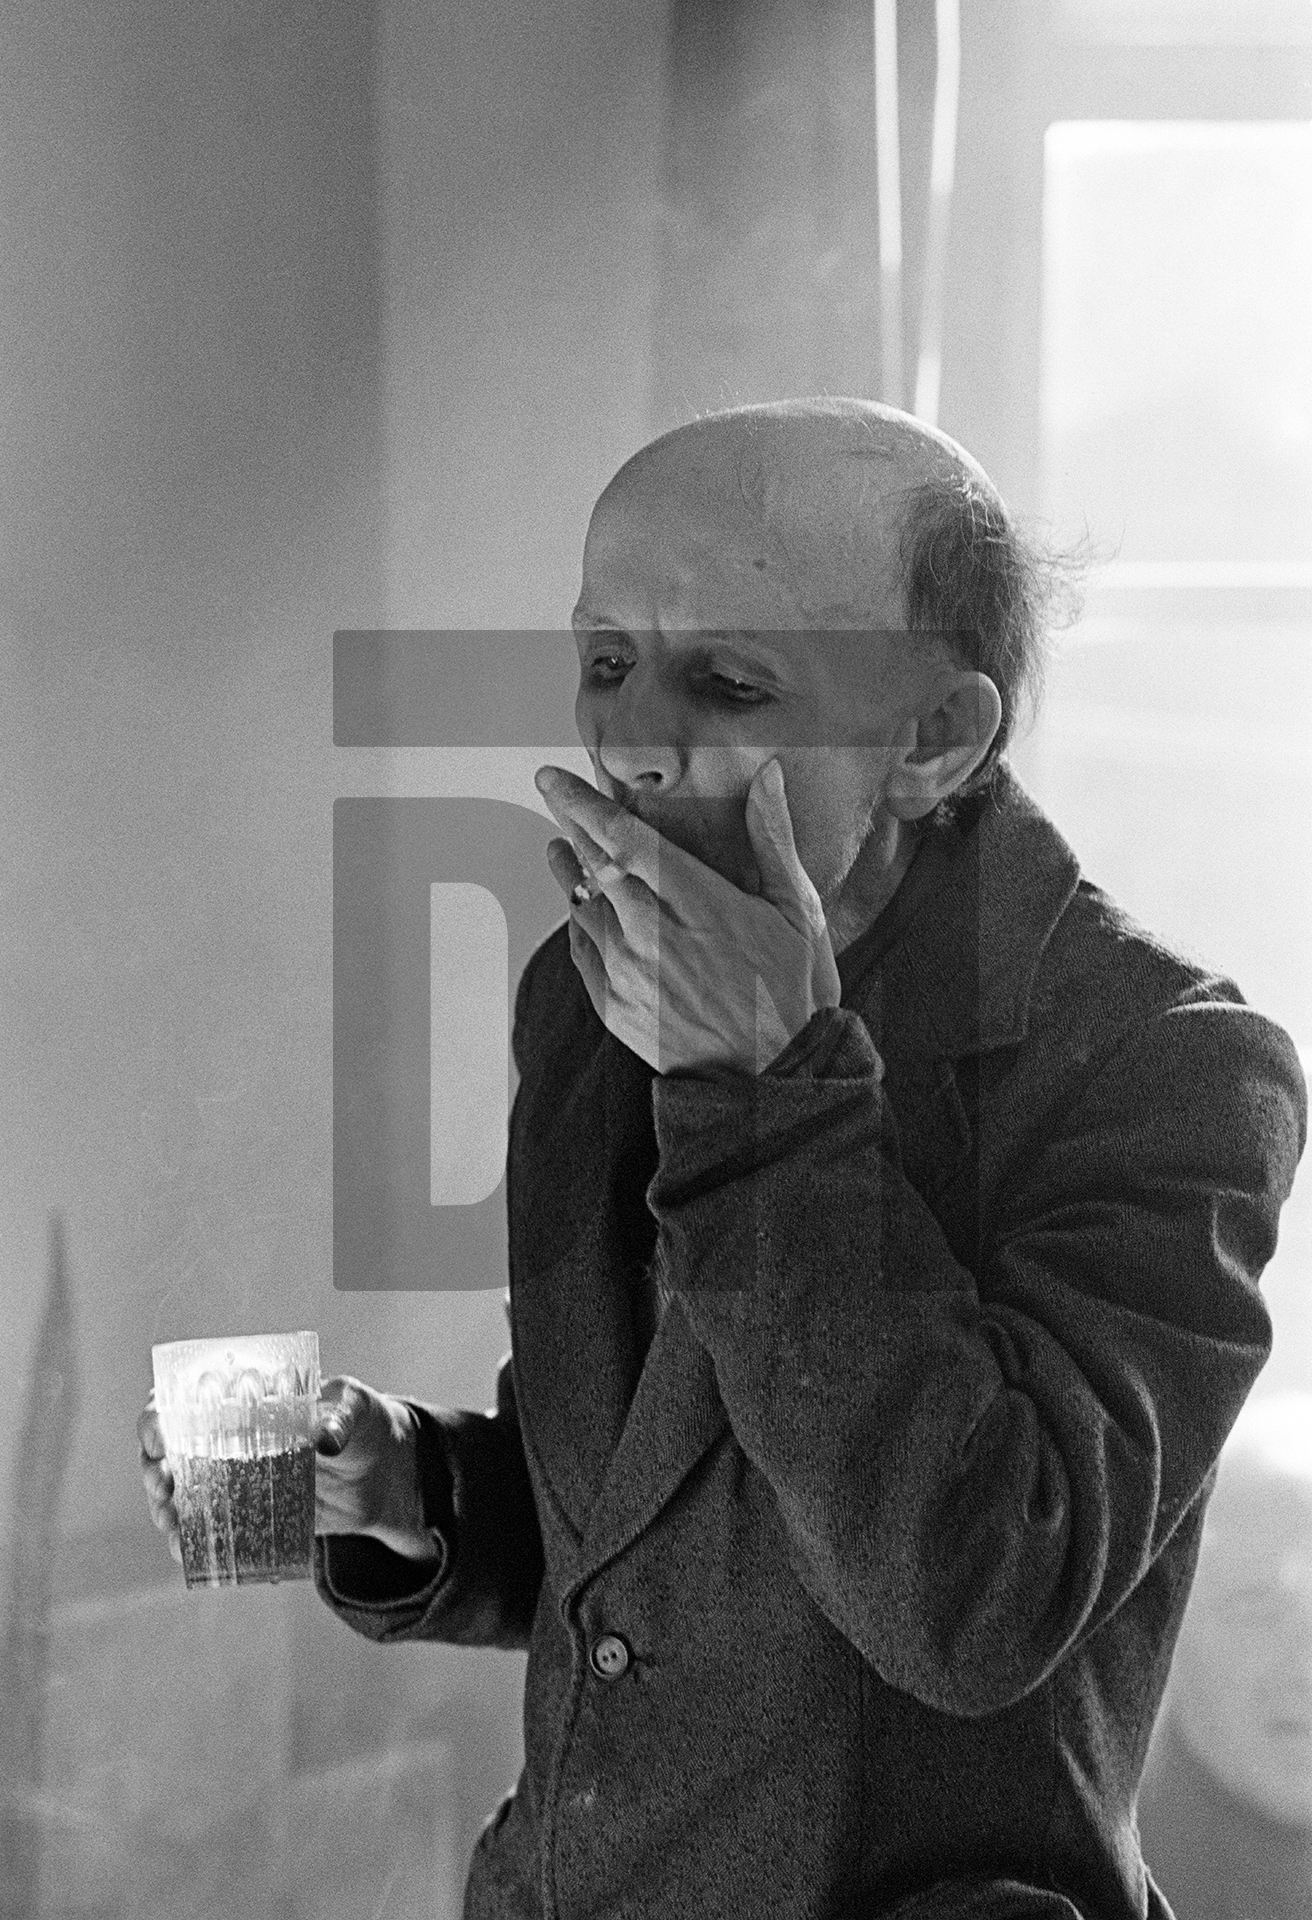 Derek Croley, aged 52 a former bus driver, enjoys a beer (5 tokens) and a cigarette (3 tokens). February 1978 by Daniel Meadows